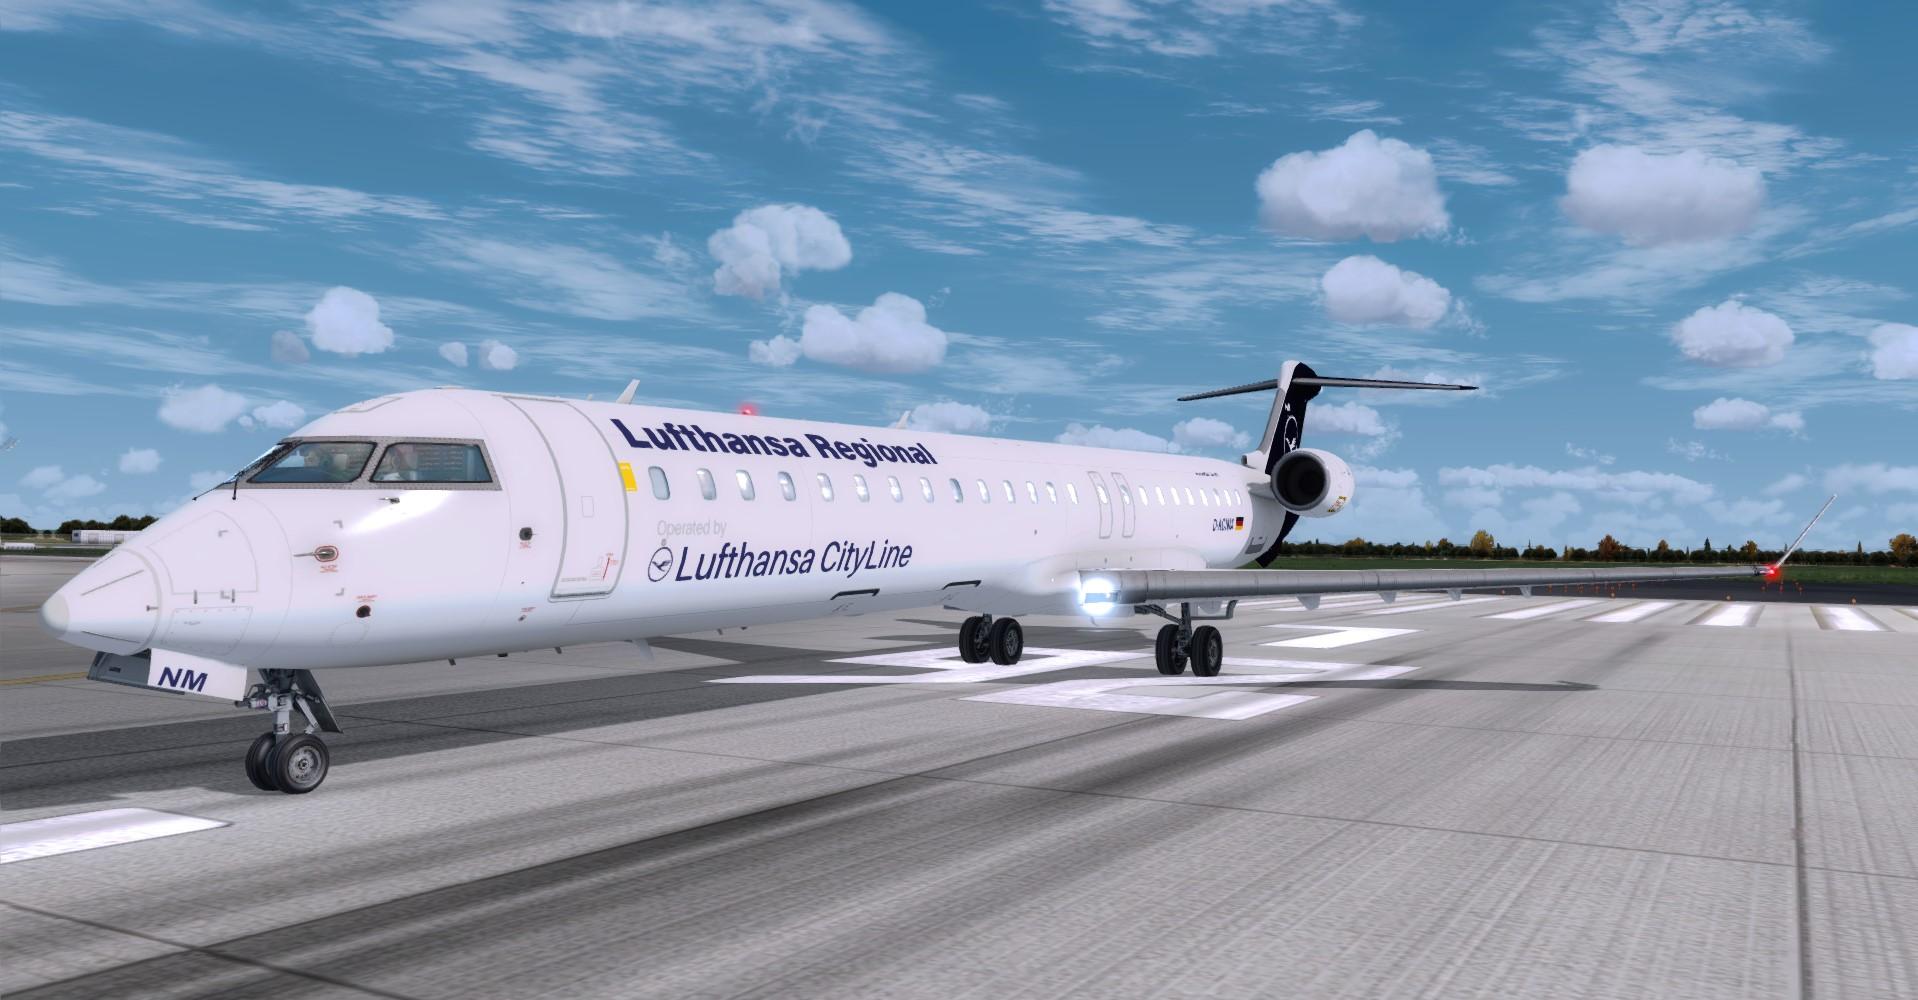 More information about "CRJ900 Lufthansa regional (New Colors) D-ACNM"